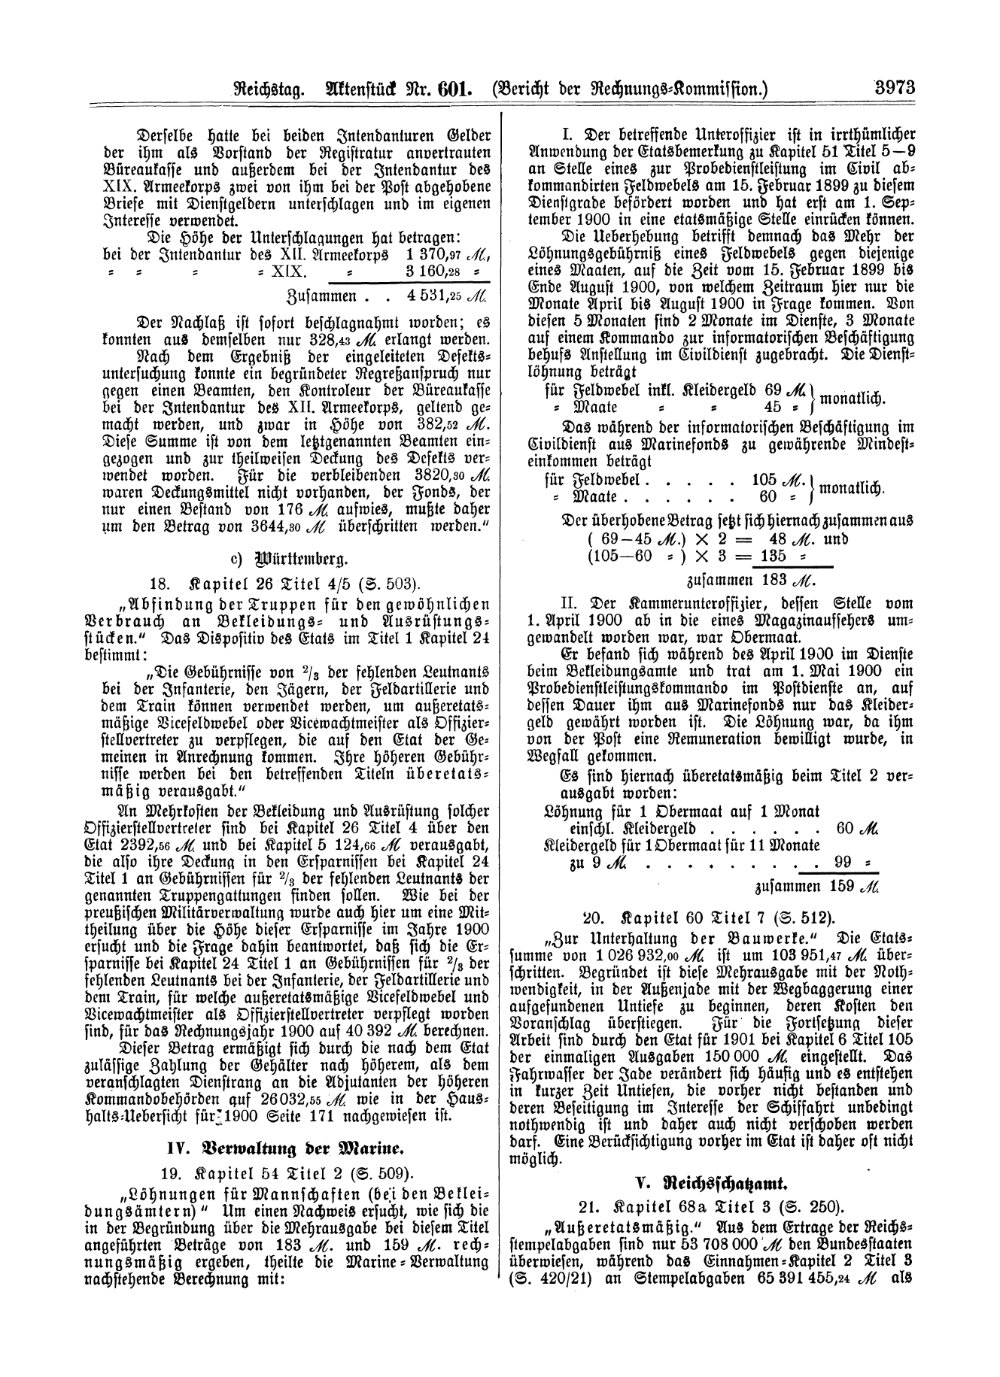 Scan of page 3973